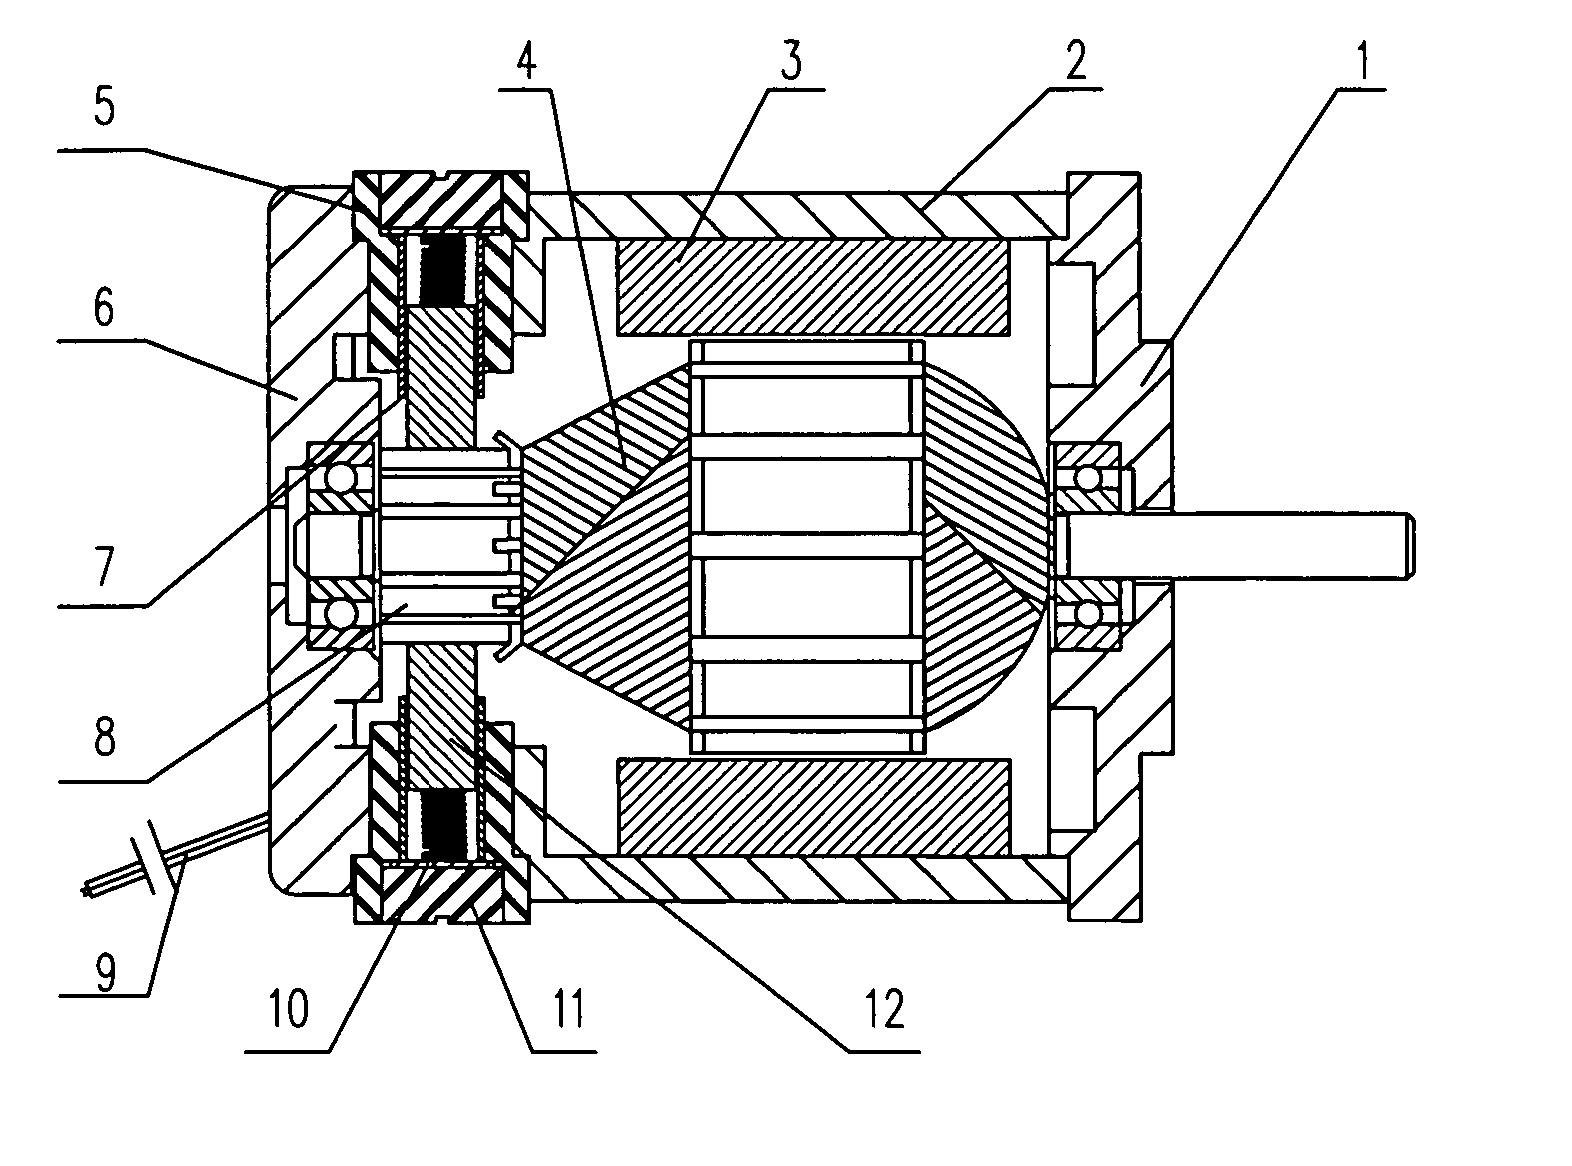 DC motor with externally mounted carbon brush